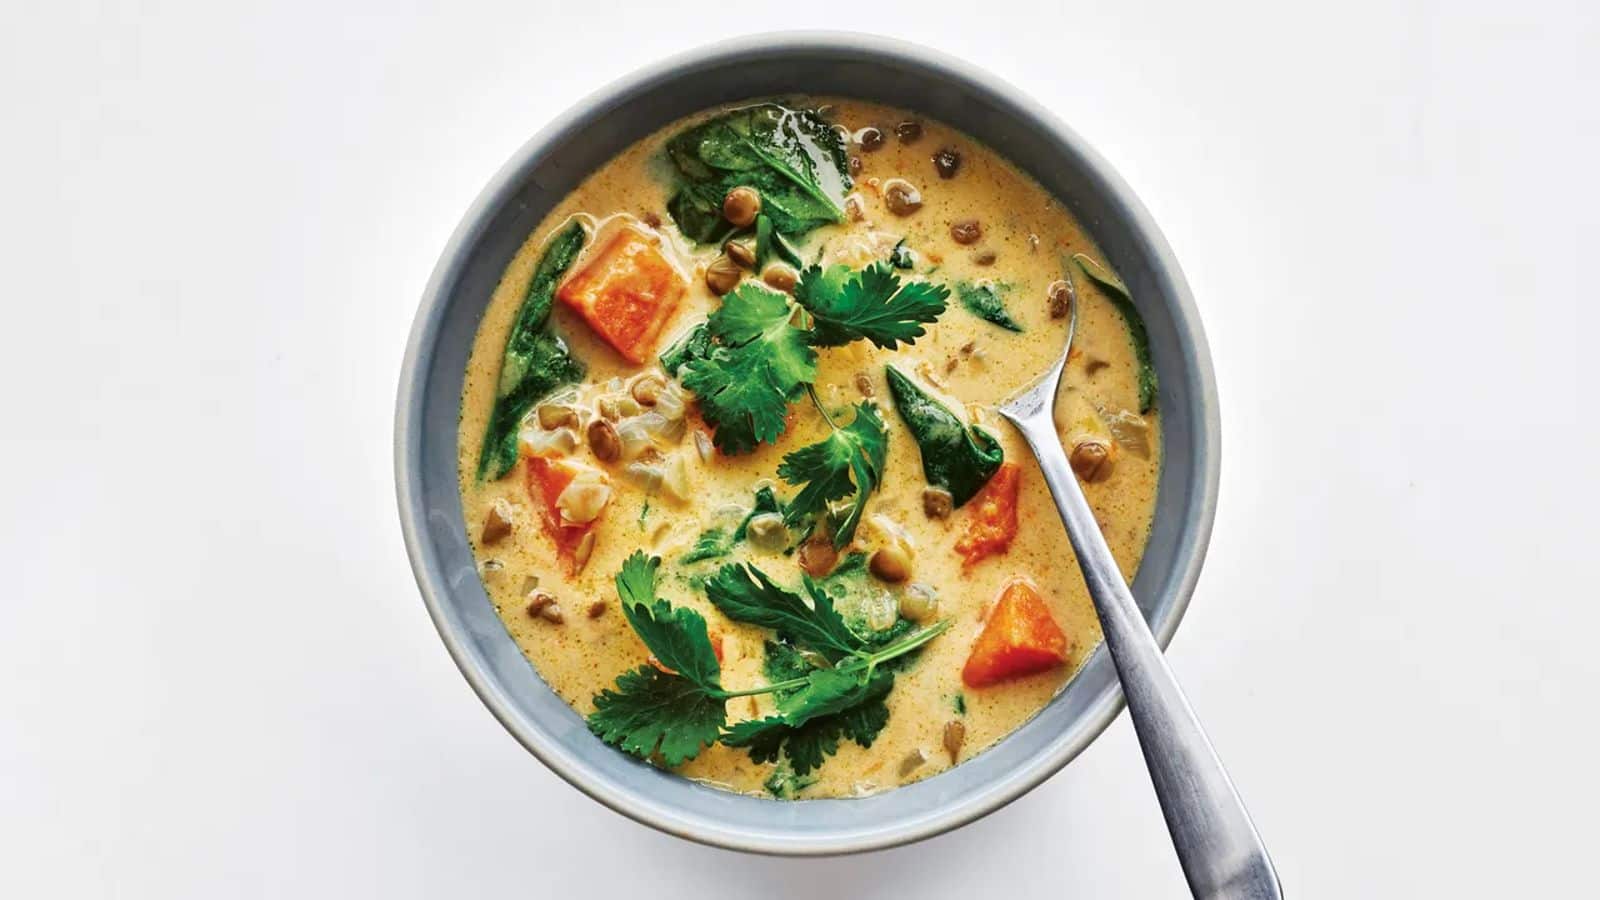 Impress your guests with this Thai green curry lentils recipe